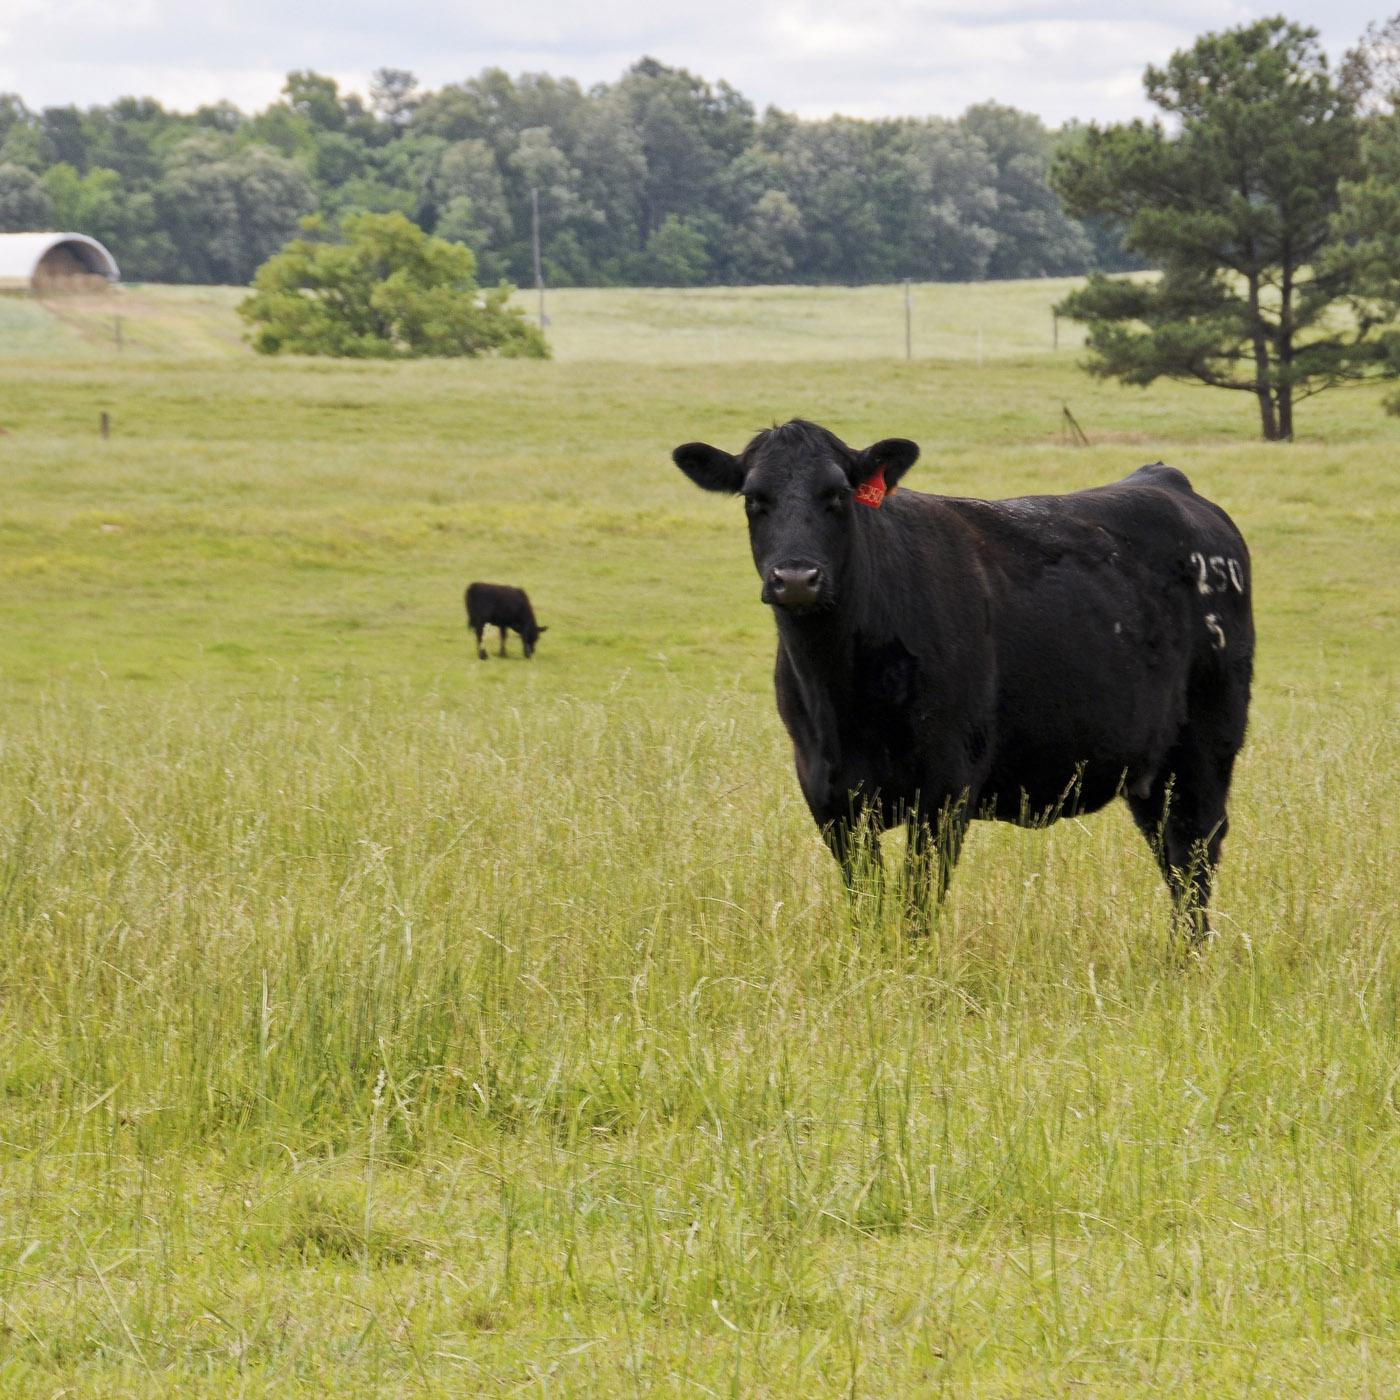 Mississippi State University has more than 1,400 acres of crop and pasture land adjacent to the Starkville campus that is dedicated to research. (Photo by Scott Corey)